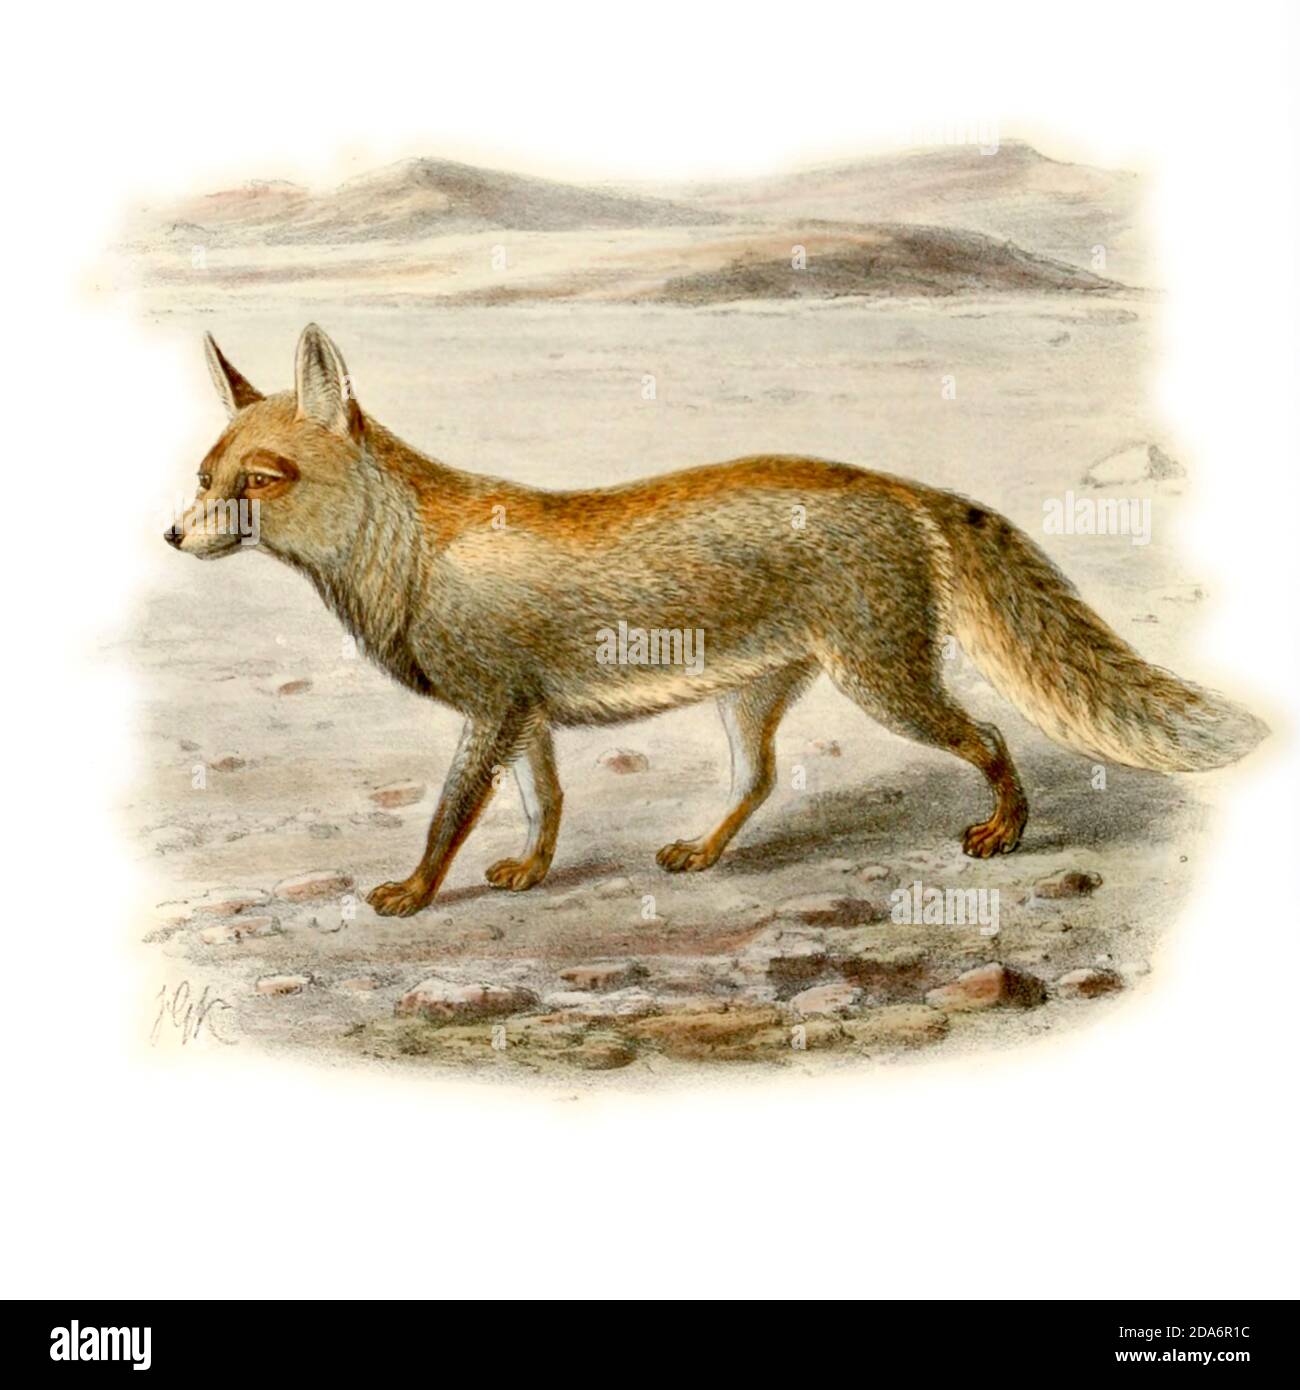 Desert Fox (Canis leucopus) From the Book Dogs, Jackals, Wolves and Foxes A Monograph of The Canidae [from Latin, canis, 'dog') is a biological family of dog-like carnivorans. A member of this family is called a canid] By George Mivart, F.R.S. with woodcuts and 45 coloured plates drawn from nature by J. G. Keulemans and Hand-Coloured. Published by R. H. Porter, London, 1890 Stock Photo